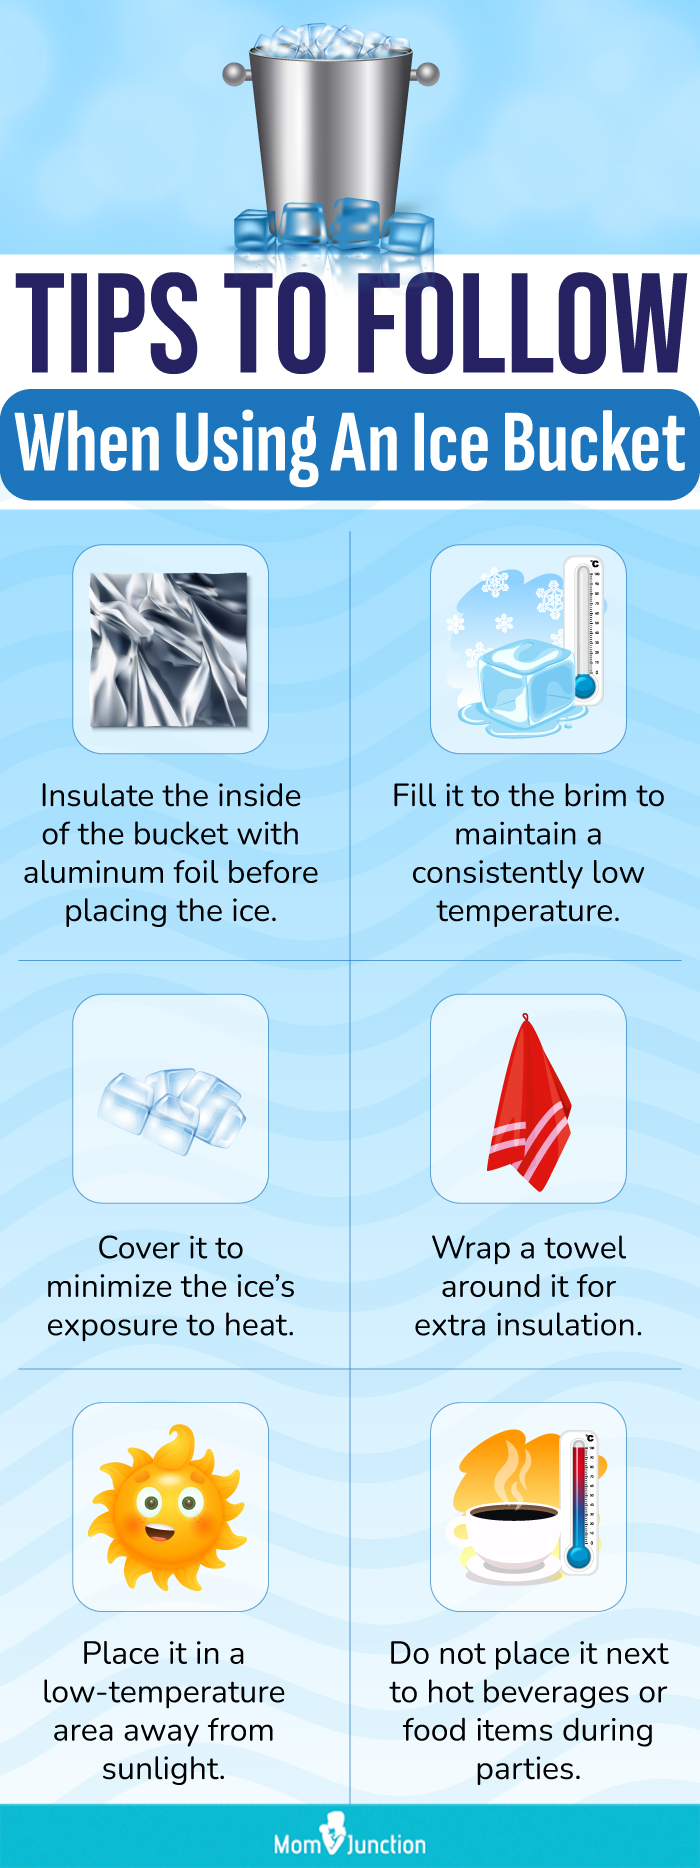 Tips To Follow When Using An Ice Bucket (infographic)